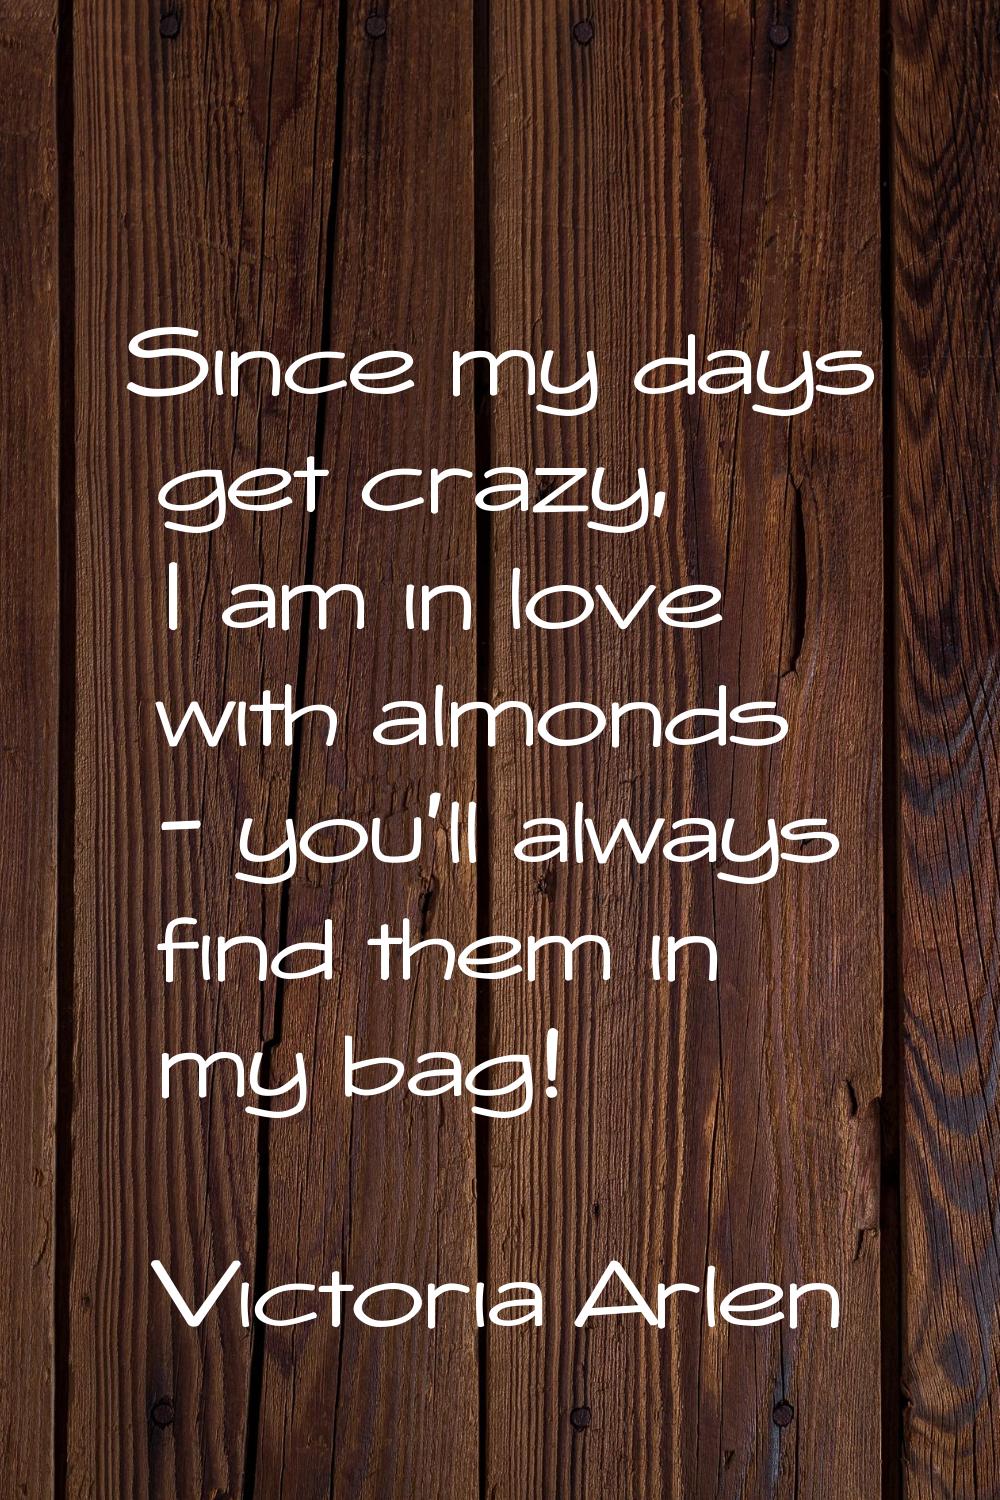 Since my days get crazy, I am in love with almonds - you'll always find them in my bag!